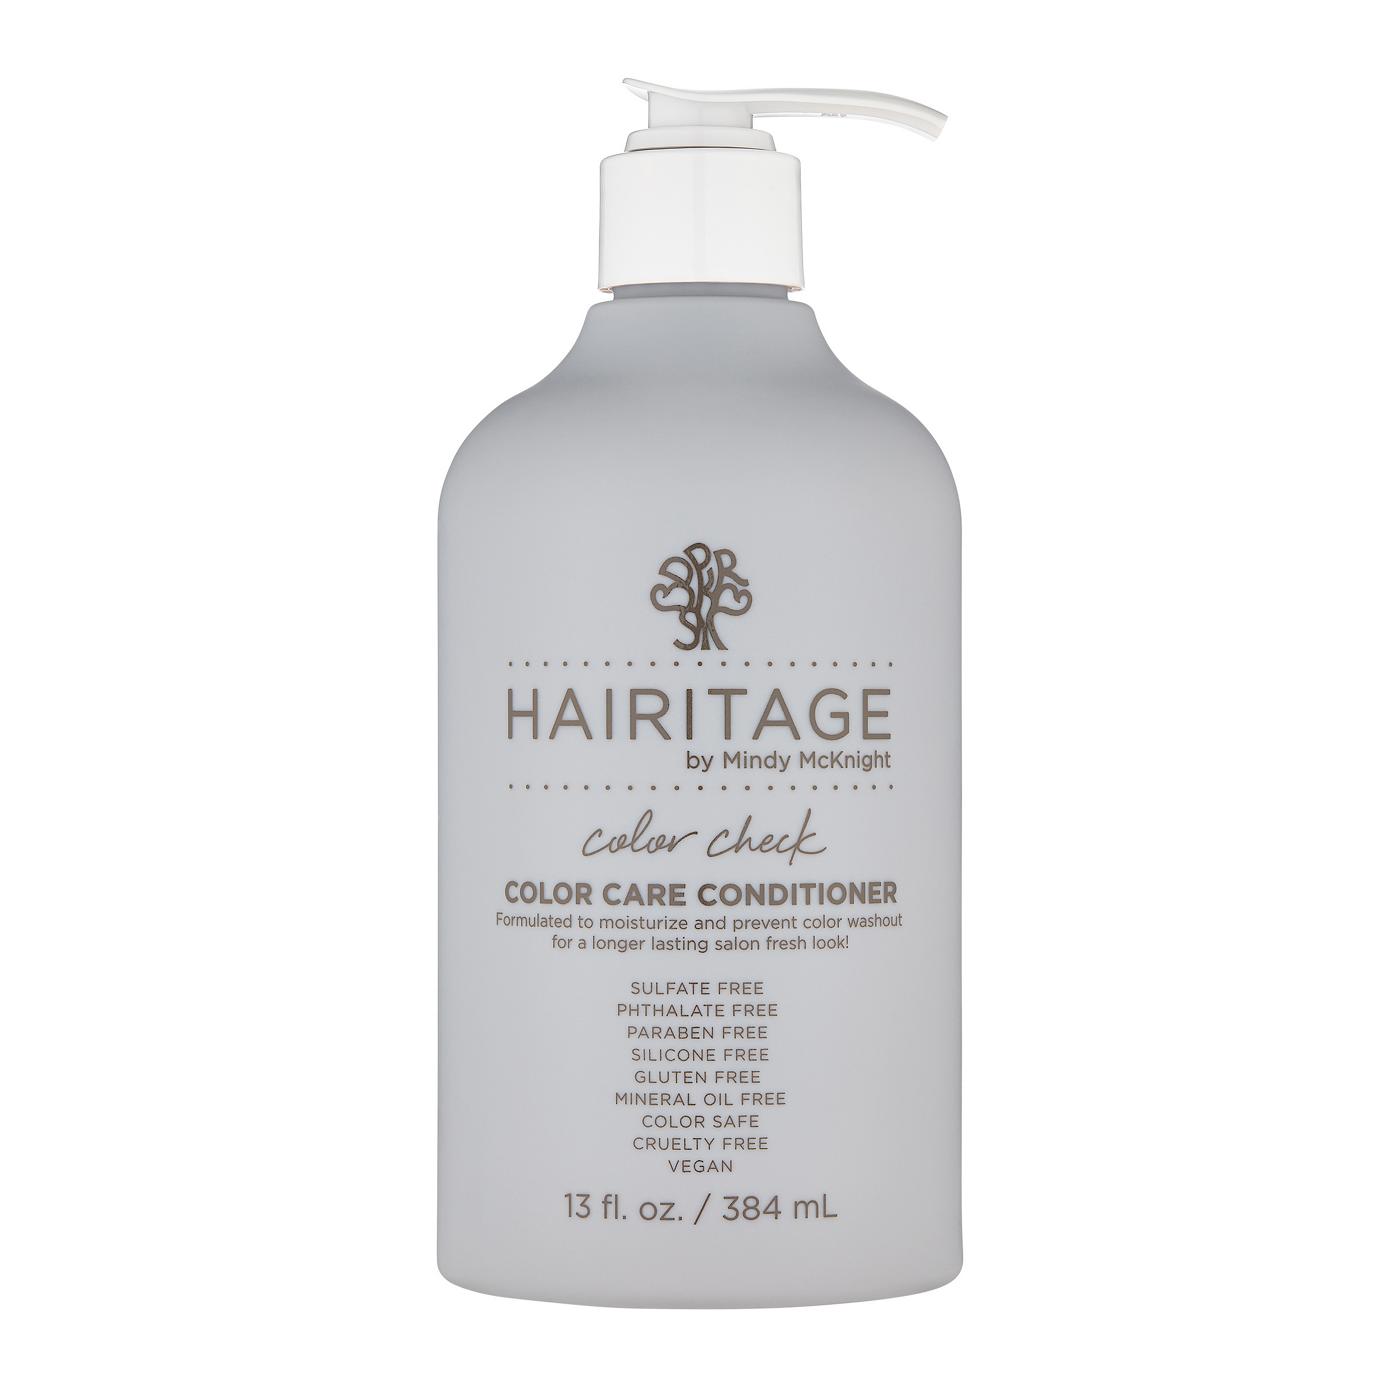 Hairitage Color Check Color Care Conditioner; image 1 of 3